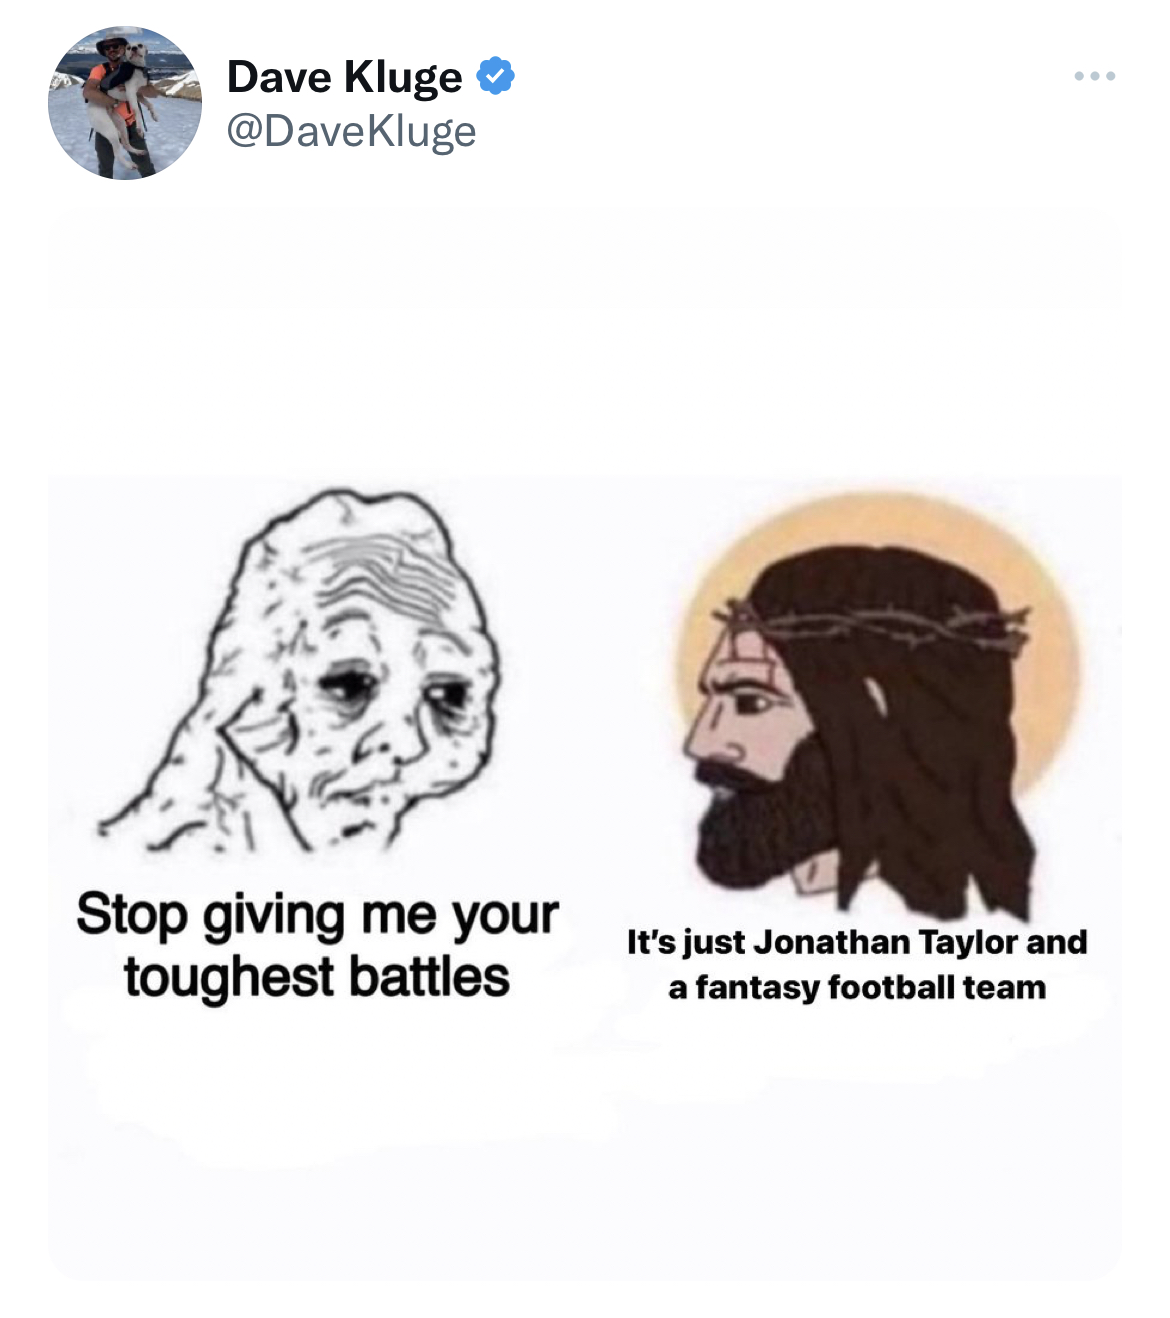 tweets roasting celebs - head - Dave Kluge Stop giving me your It's just Jonathan Taylor and toughest battles a fantasy football team